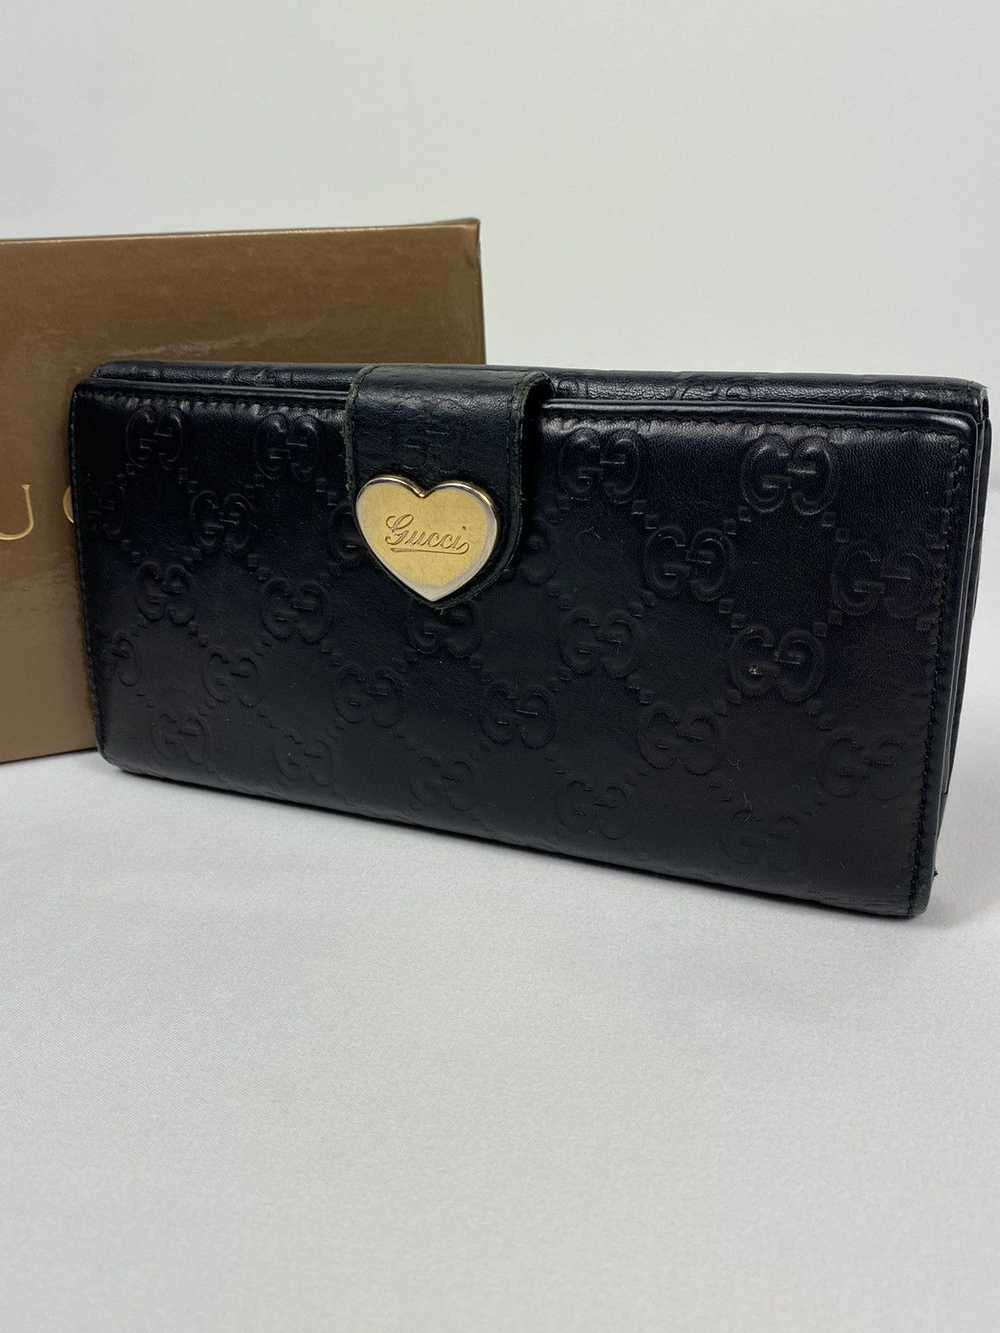 Gucci Gucci GG Guccissima leather long wallet - image 3